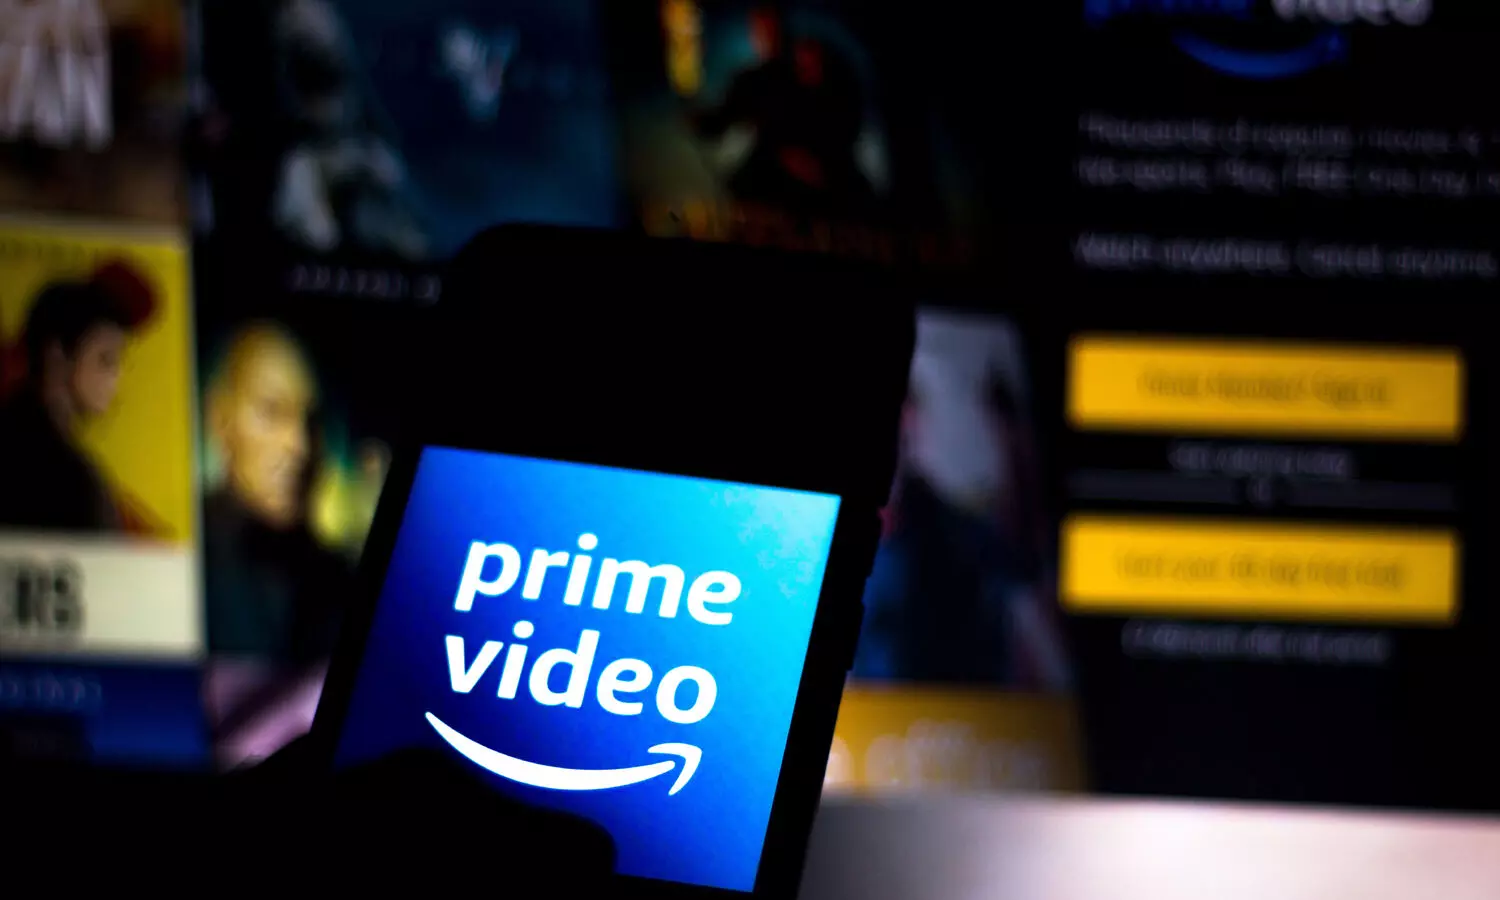 Amazon Prime Membership: Last chance to avail Rs 999 Plan, Check details